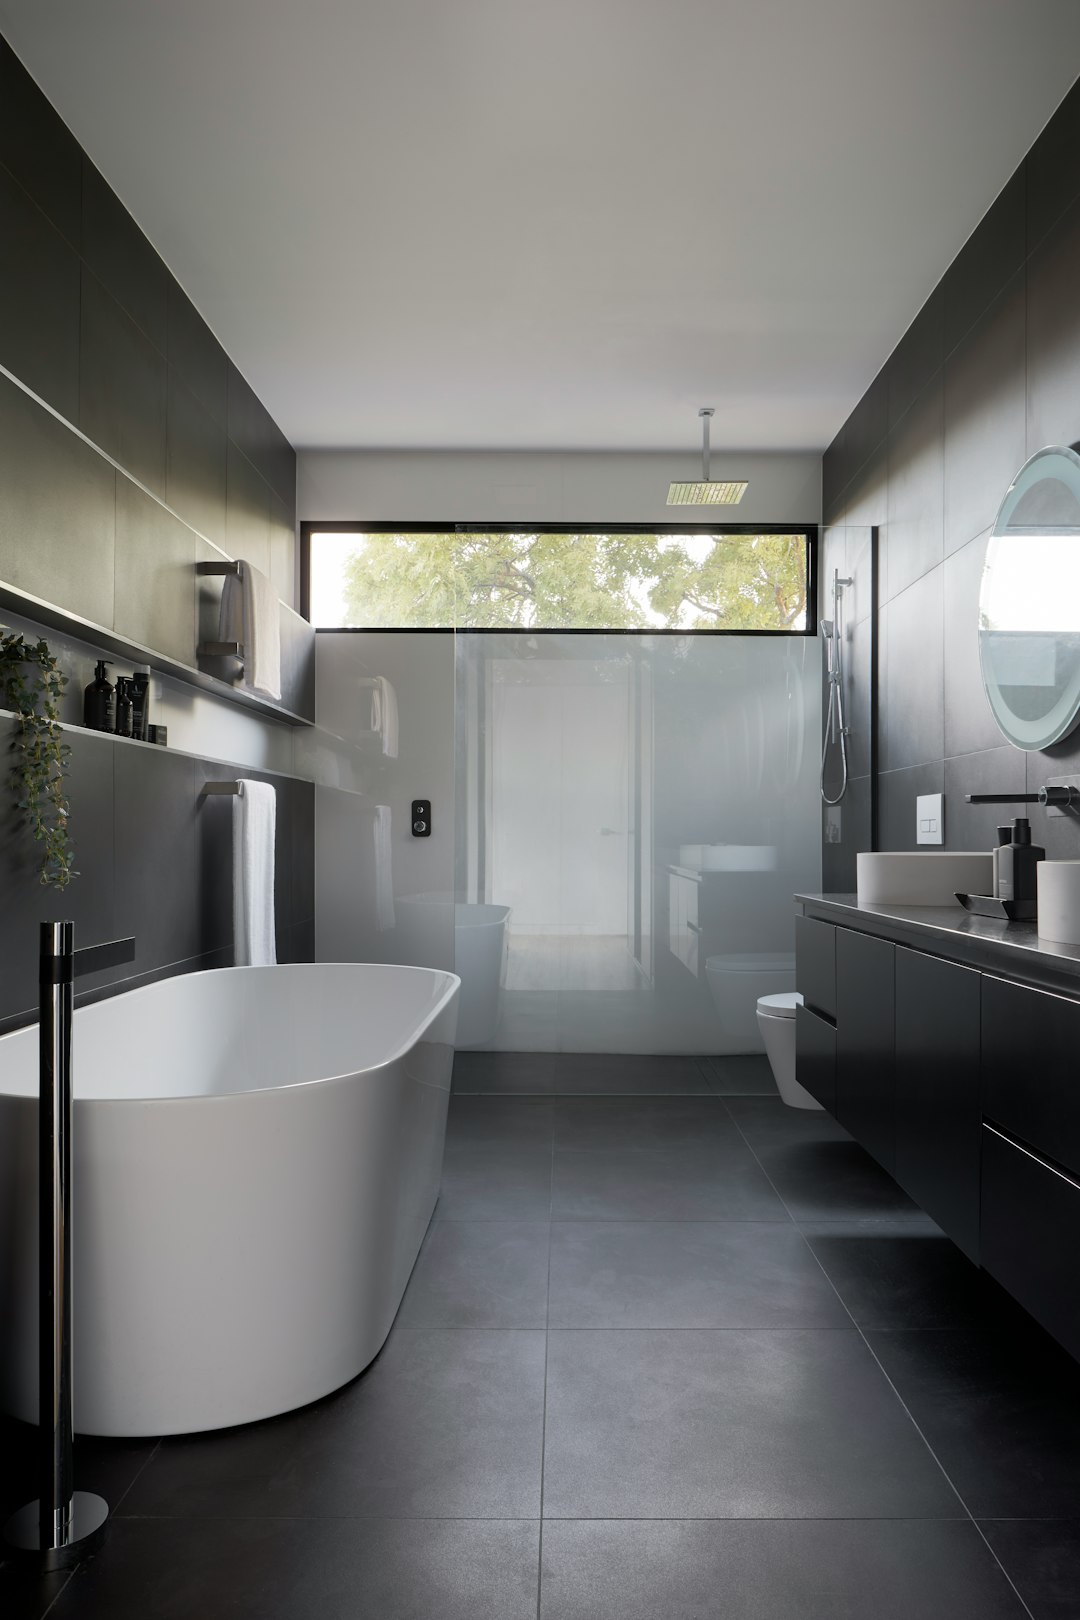 DIY or Hire a Pro? Pros and Cons of Each Approach to Bathroom Remodeling